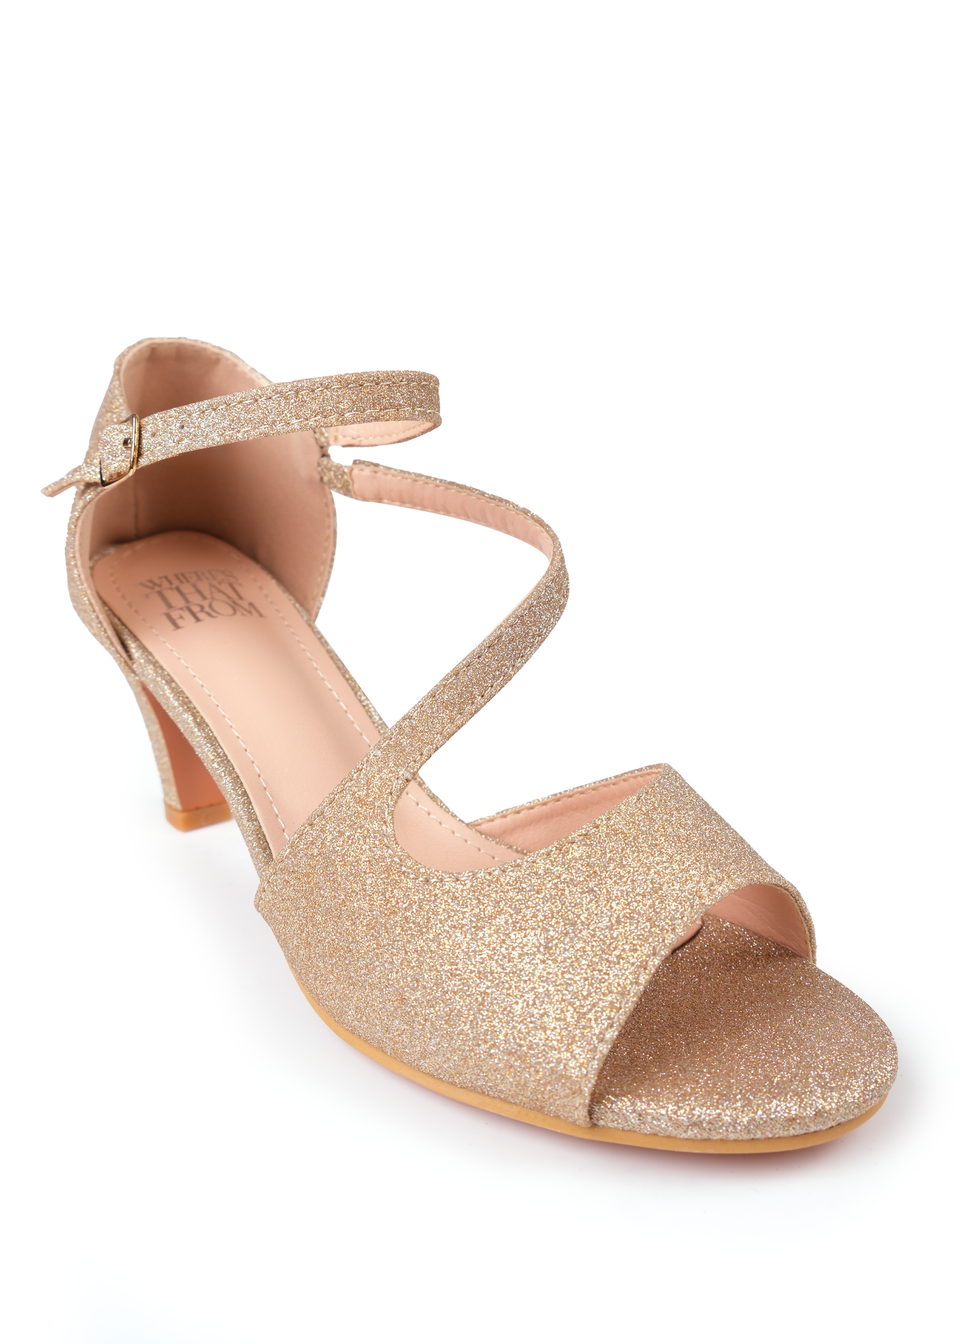 Where's That From Champagne Glitter Beatrice Low Kitten Heels